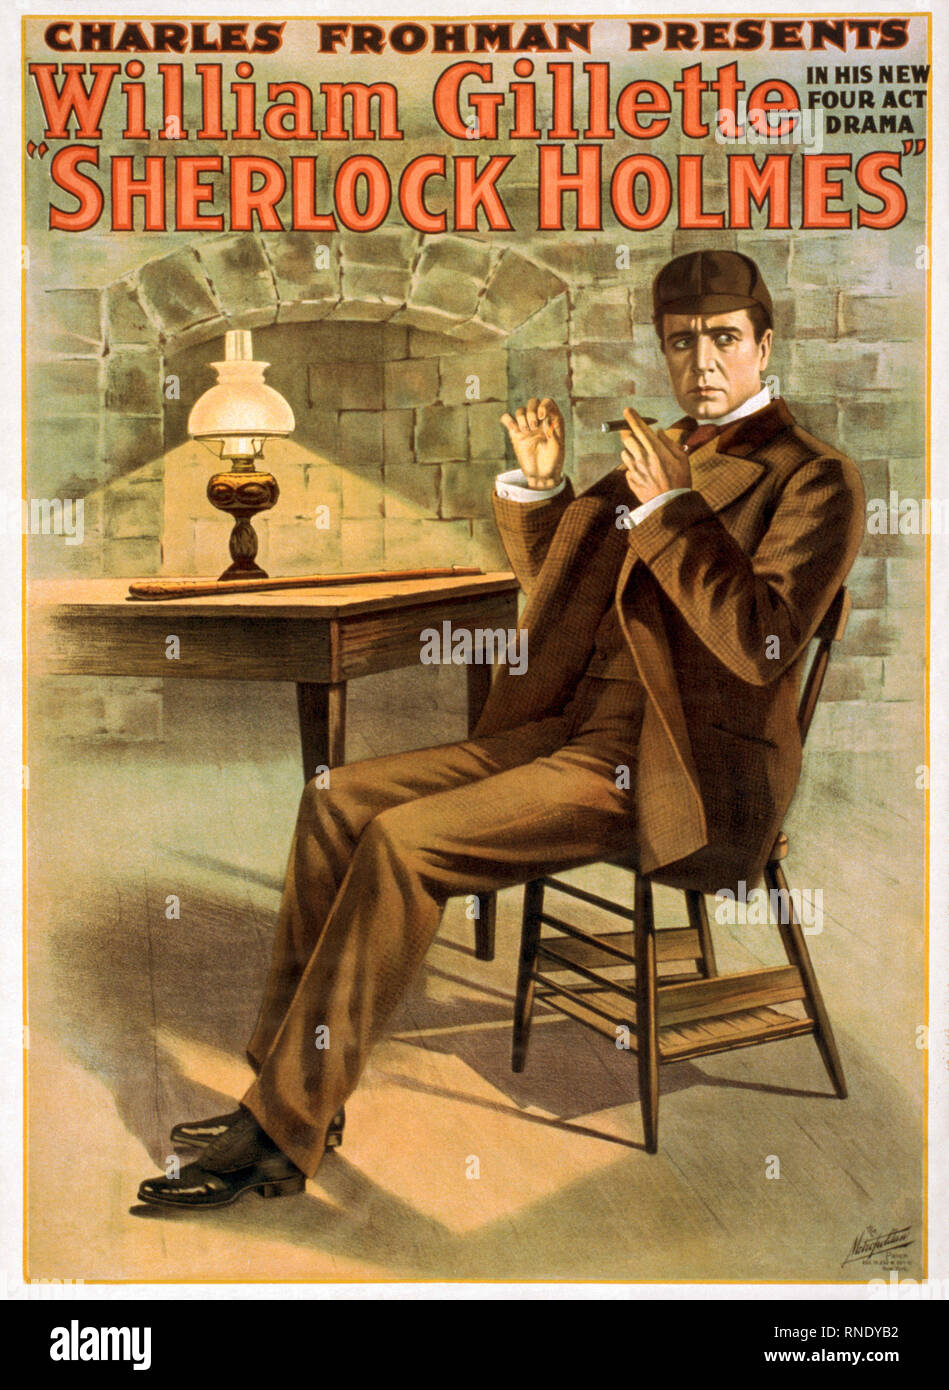 Sherlock Holmes theatre production theatrical poster, 1900 Stock Photo